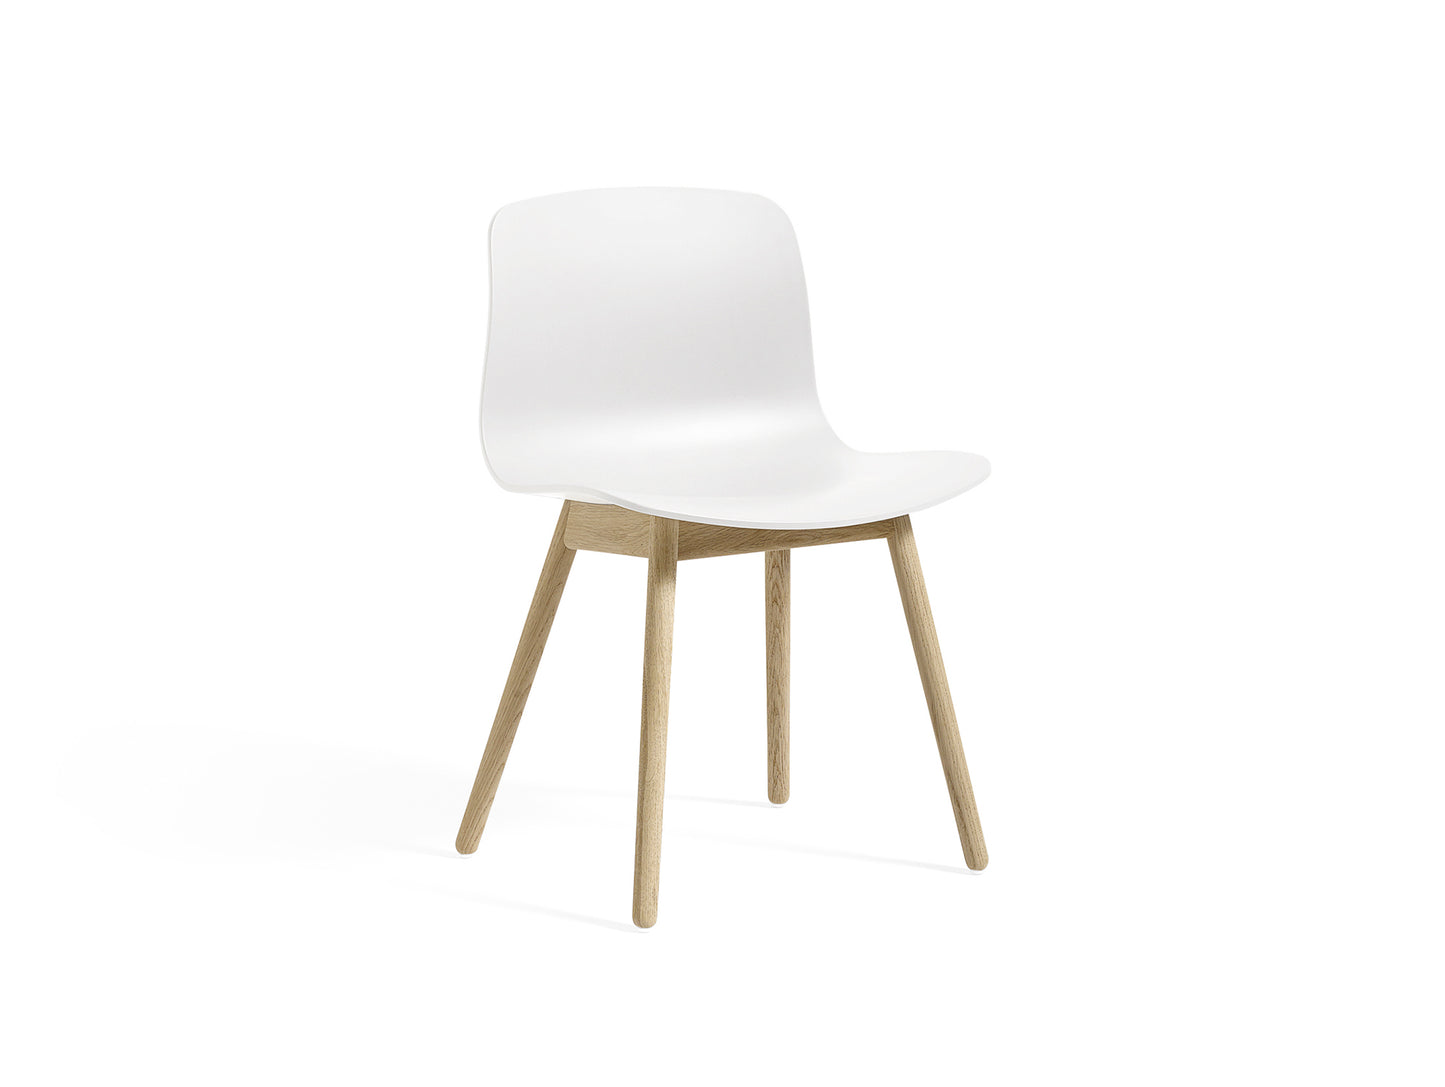 About A Chair AAC 12 by HAY - White 2.0 Shell / Saoped Oak Base